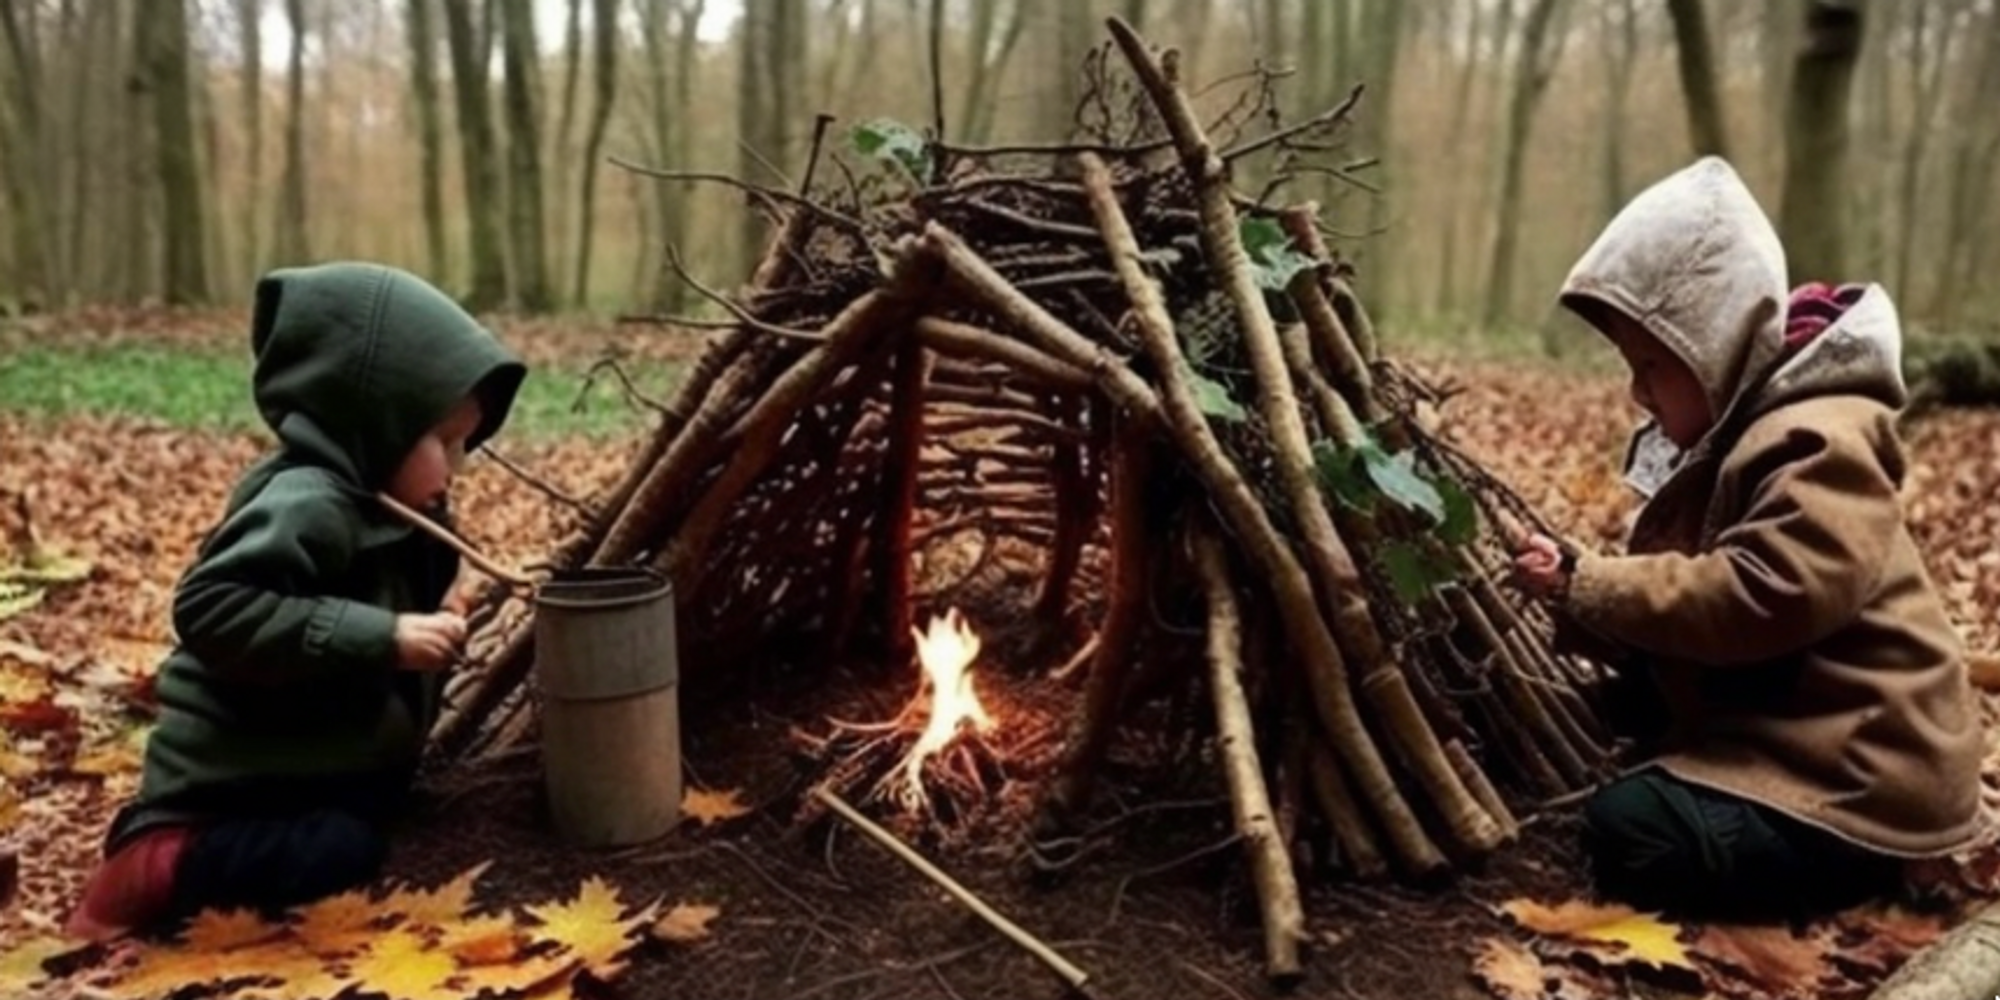 Cover Image for 10 Engaging Forest School Ideas to Inspire Outdoor Learning and Growth